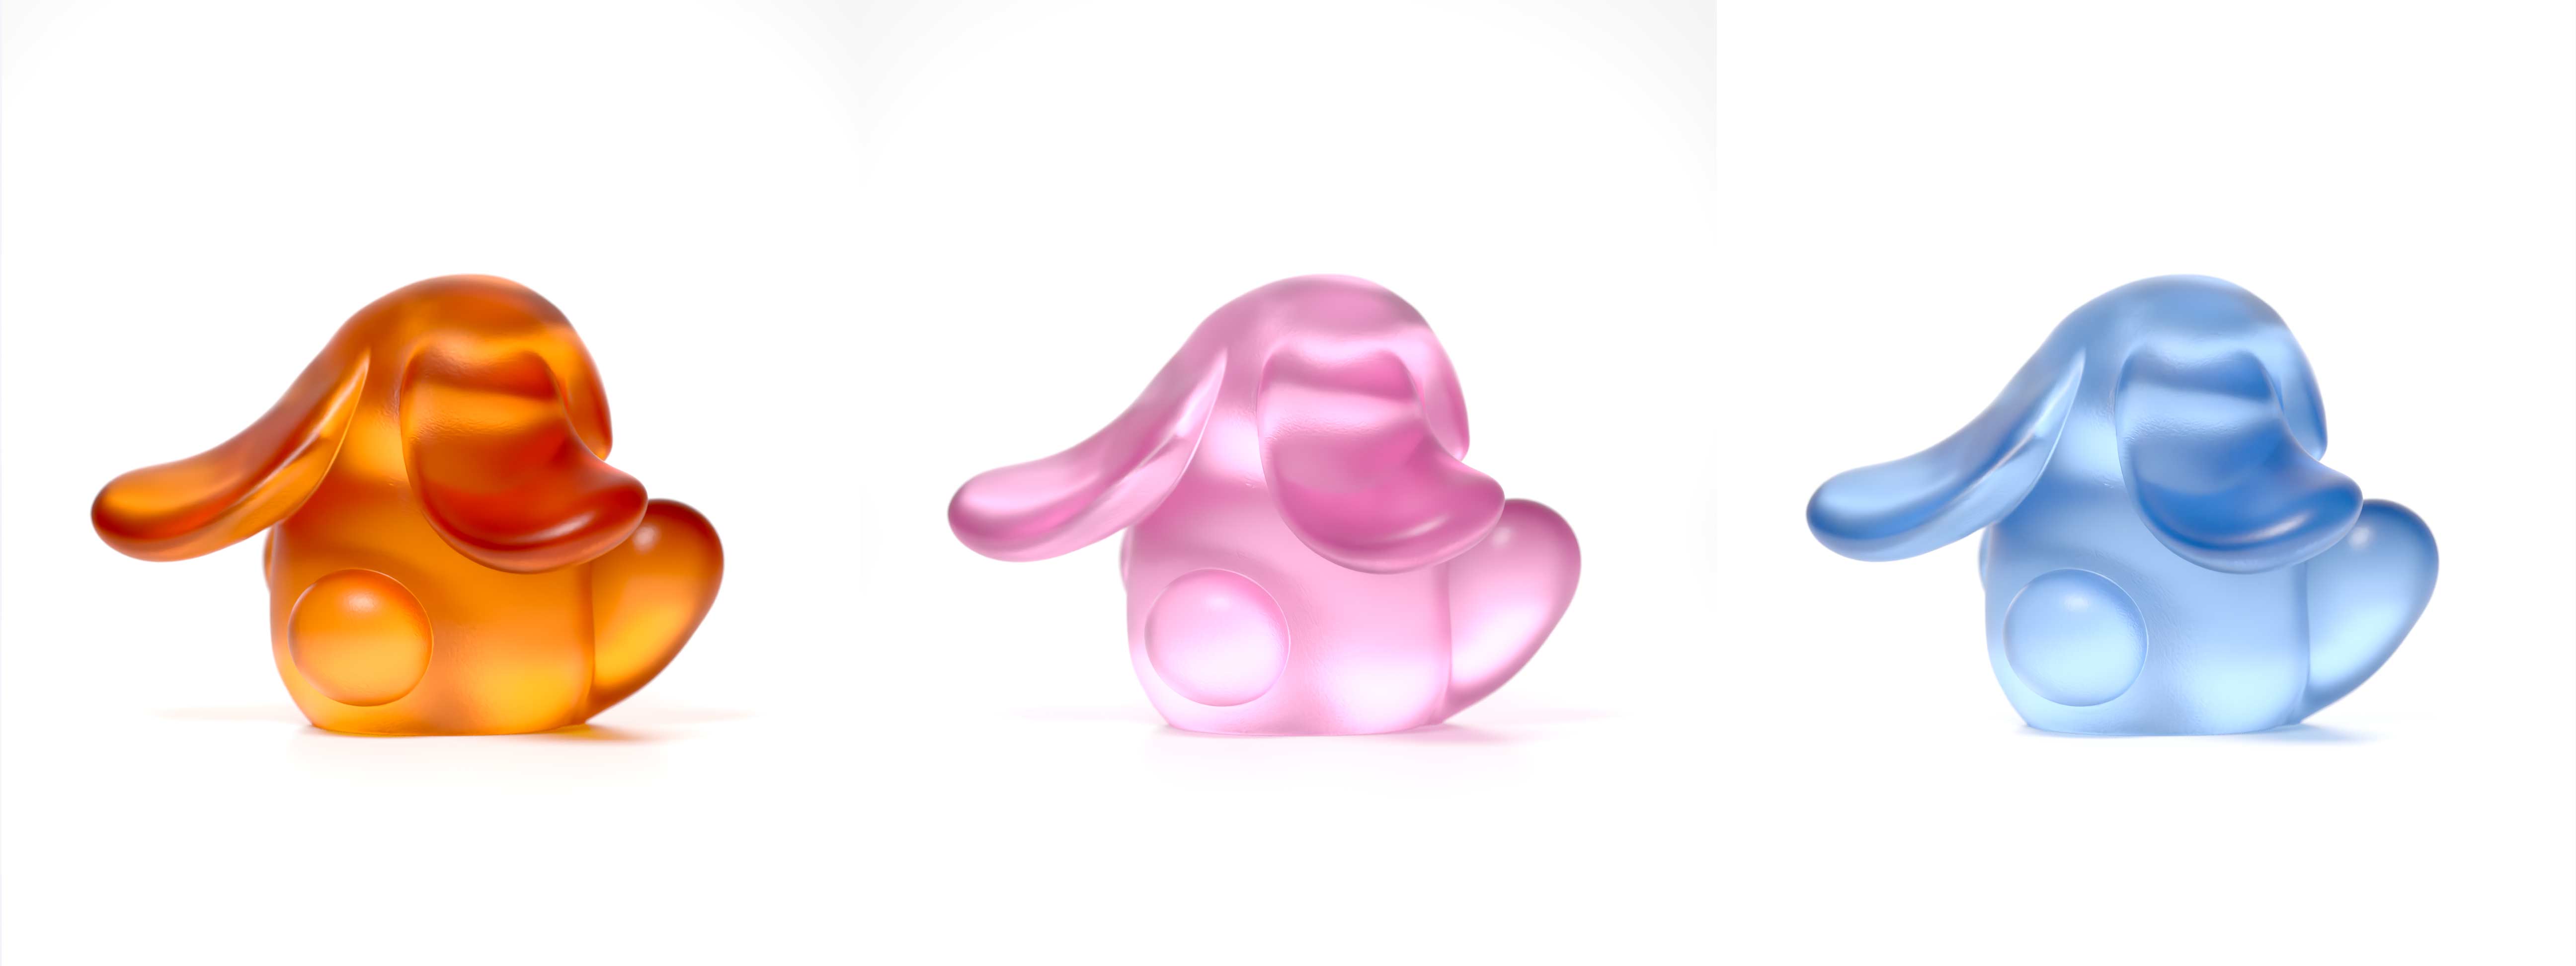 "Bunnie Roar Crystal," a sculpture, ambet, pink and blue colors, is an artistic creation by Ferdi B Dick 01 